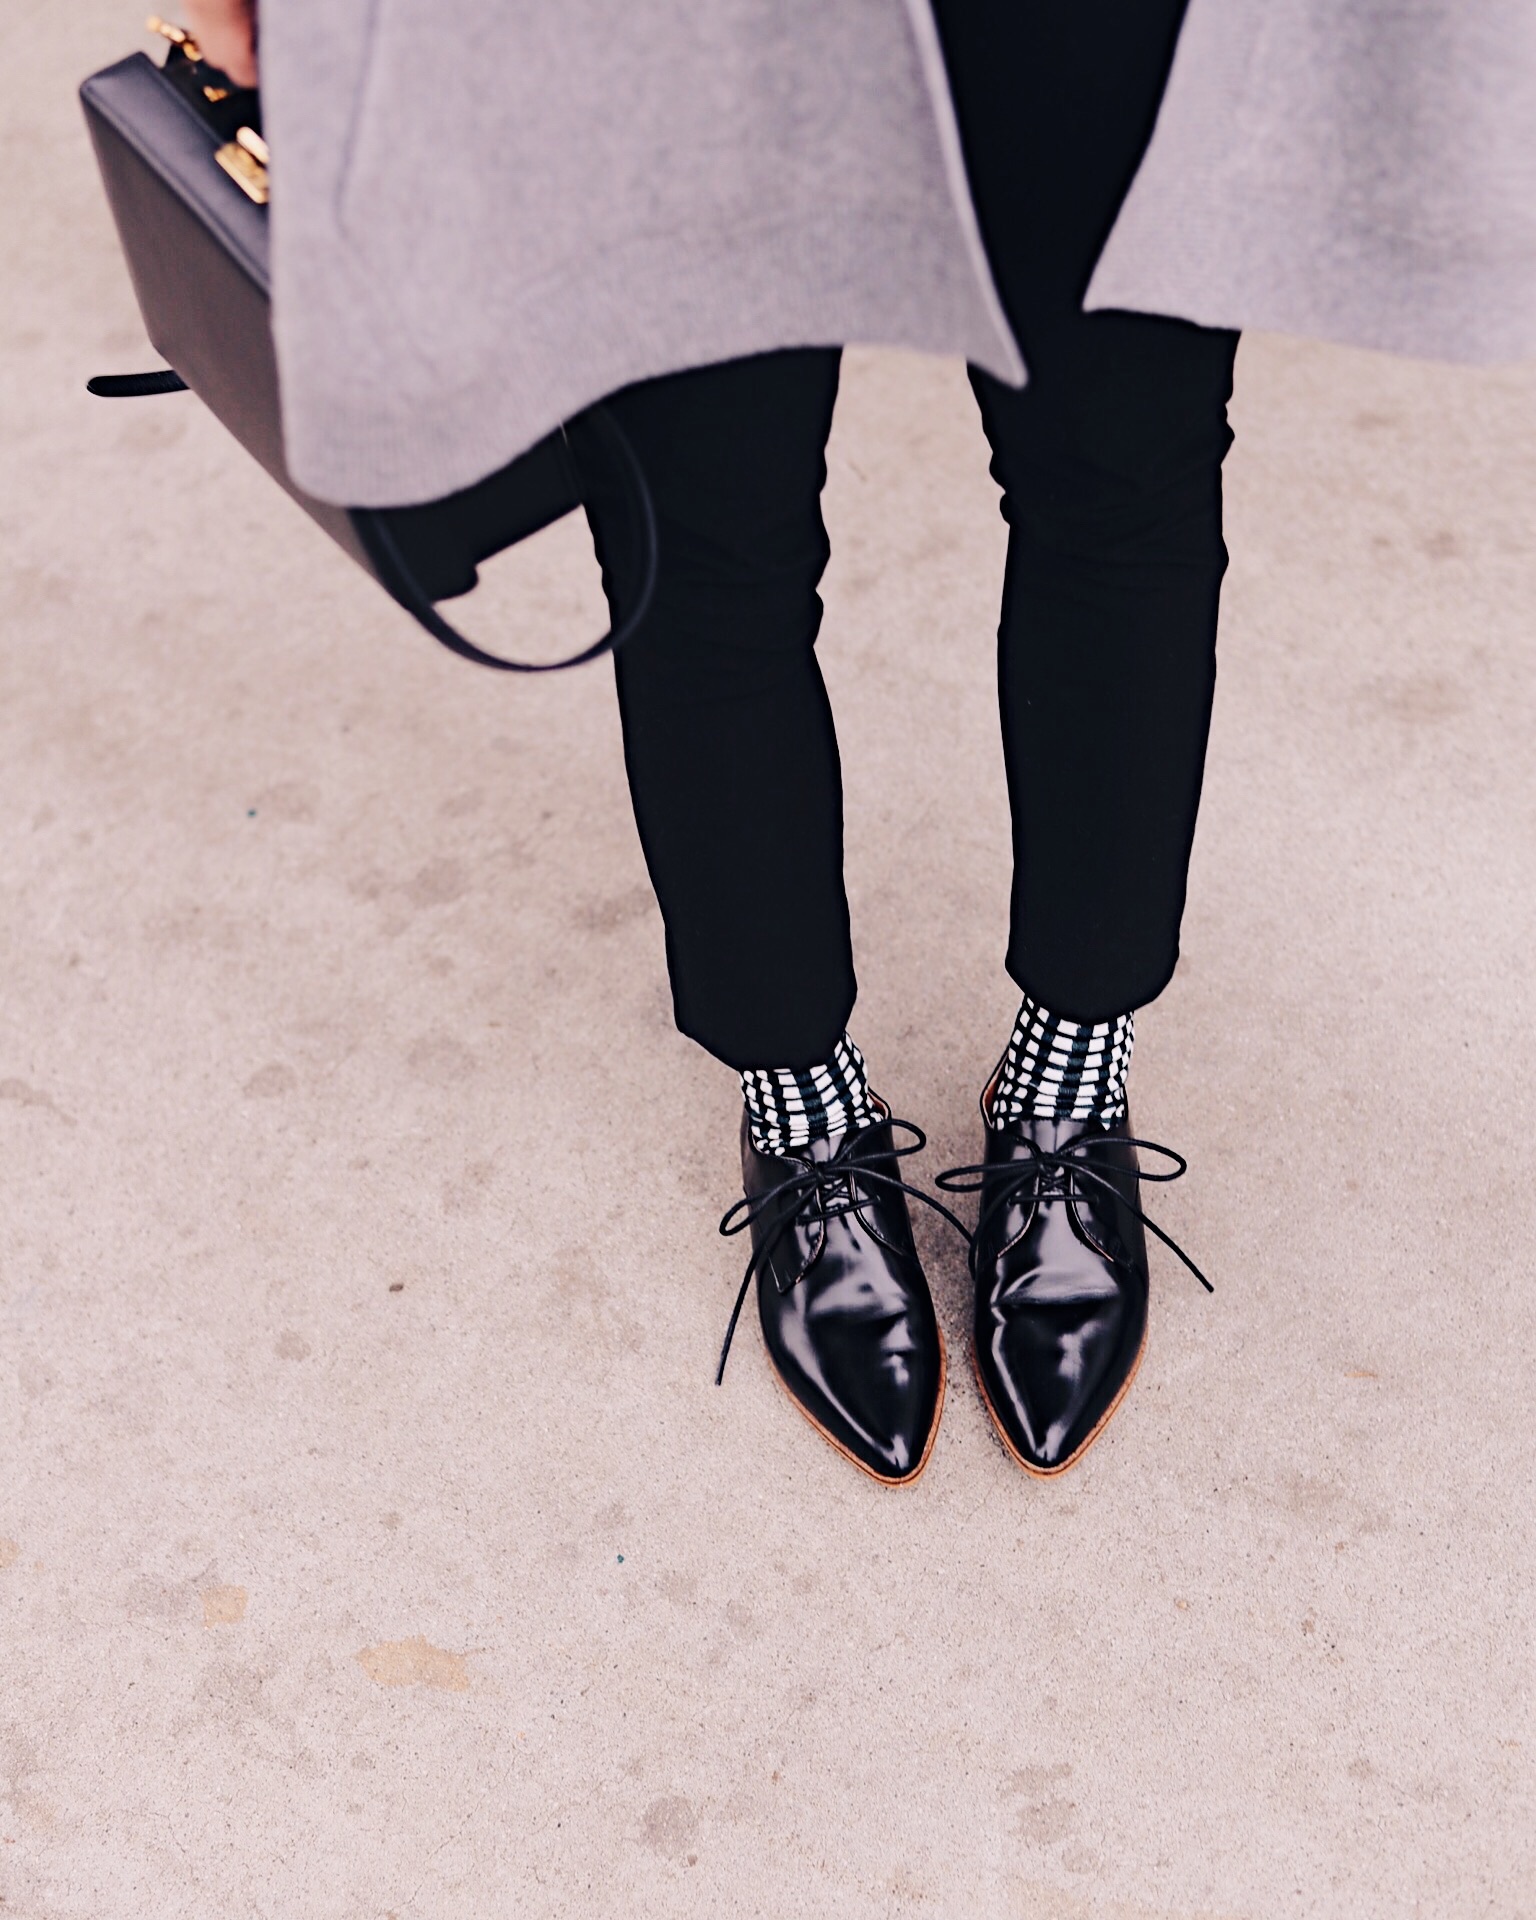 pointed toe oxfords